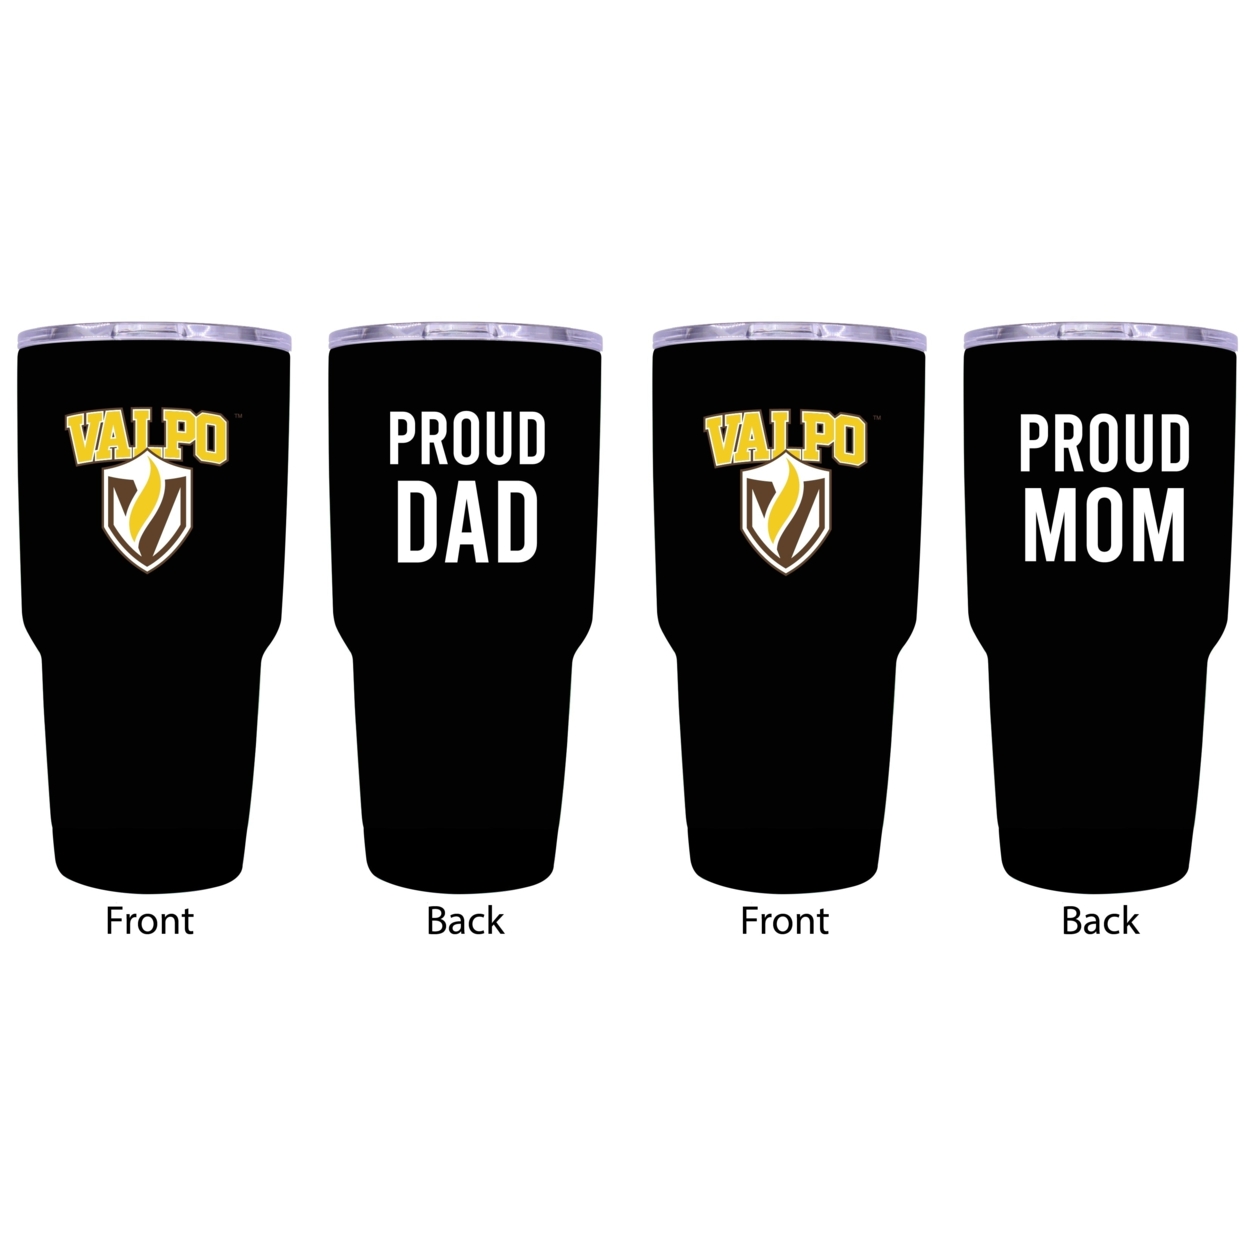 Valparaiso University Proud Mom And Dad 24 Oz Insulated Stainless Steel Tumblers 2 Pack Black.